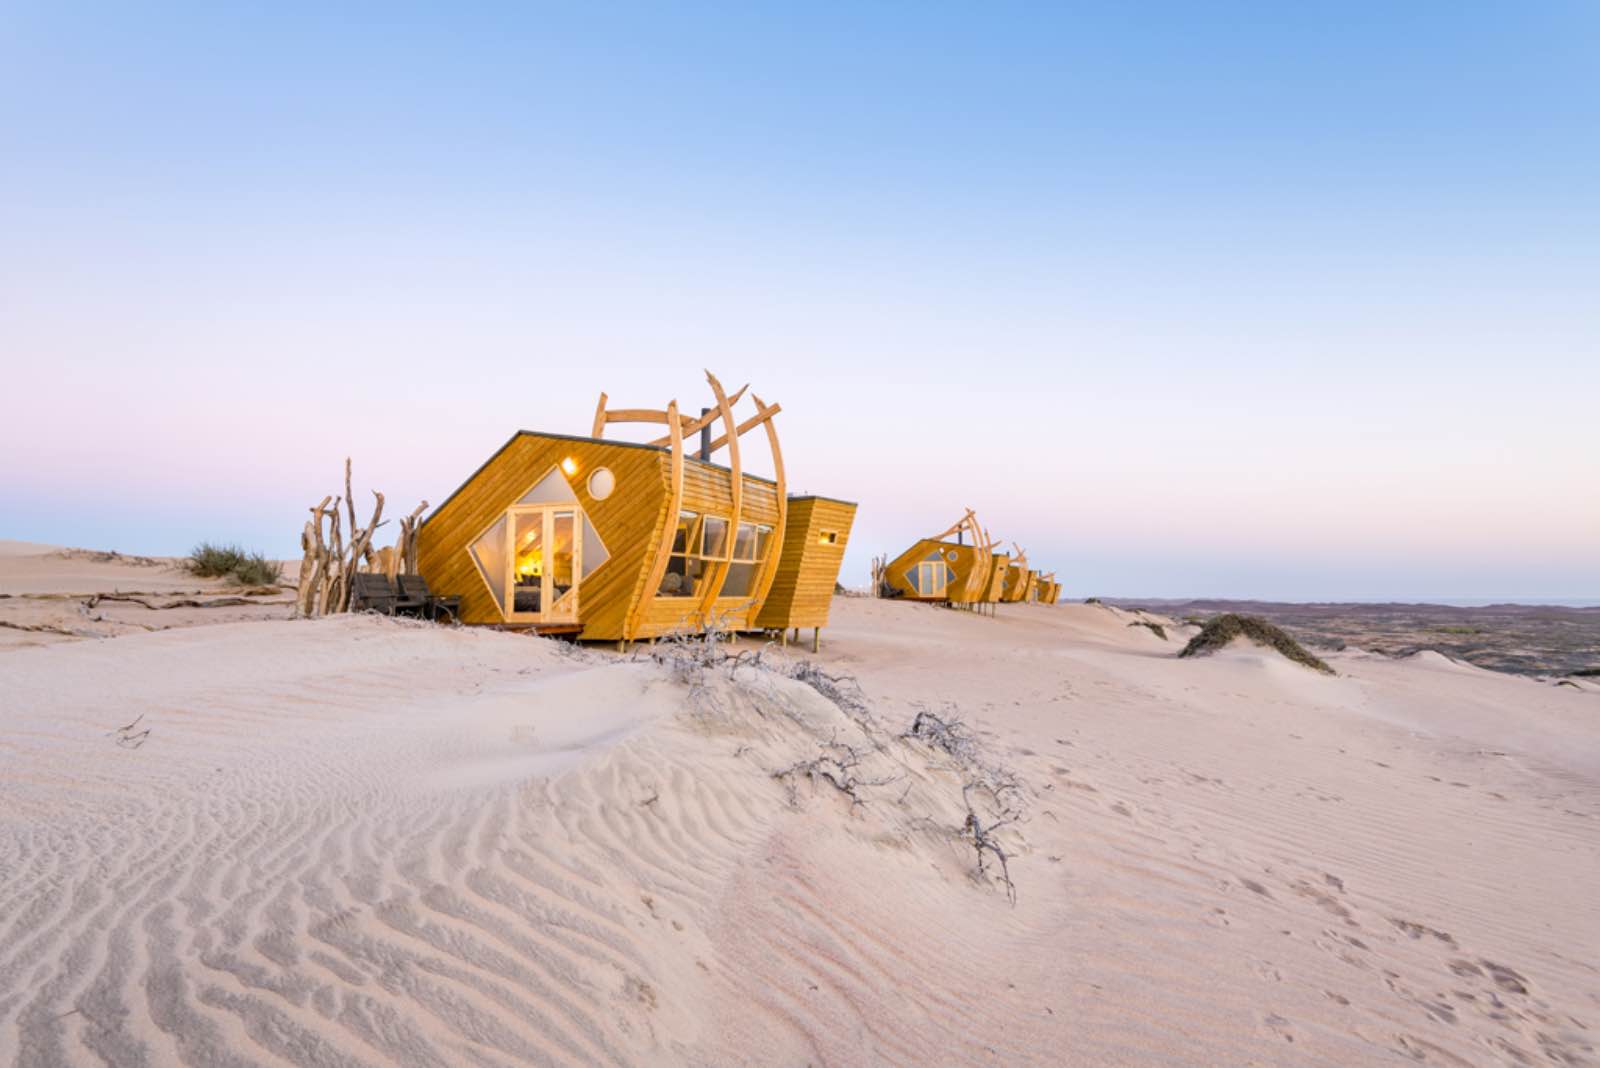 Shipwreck Lodge unique cabin-style bedrooms on the Skeleton Coast beaches